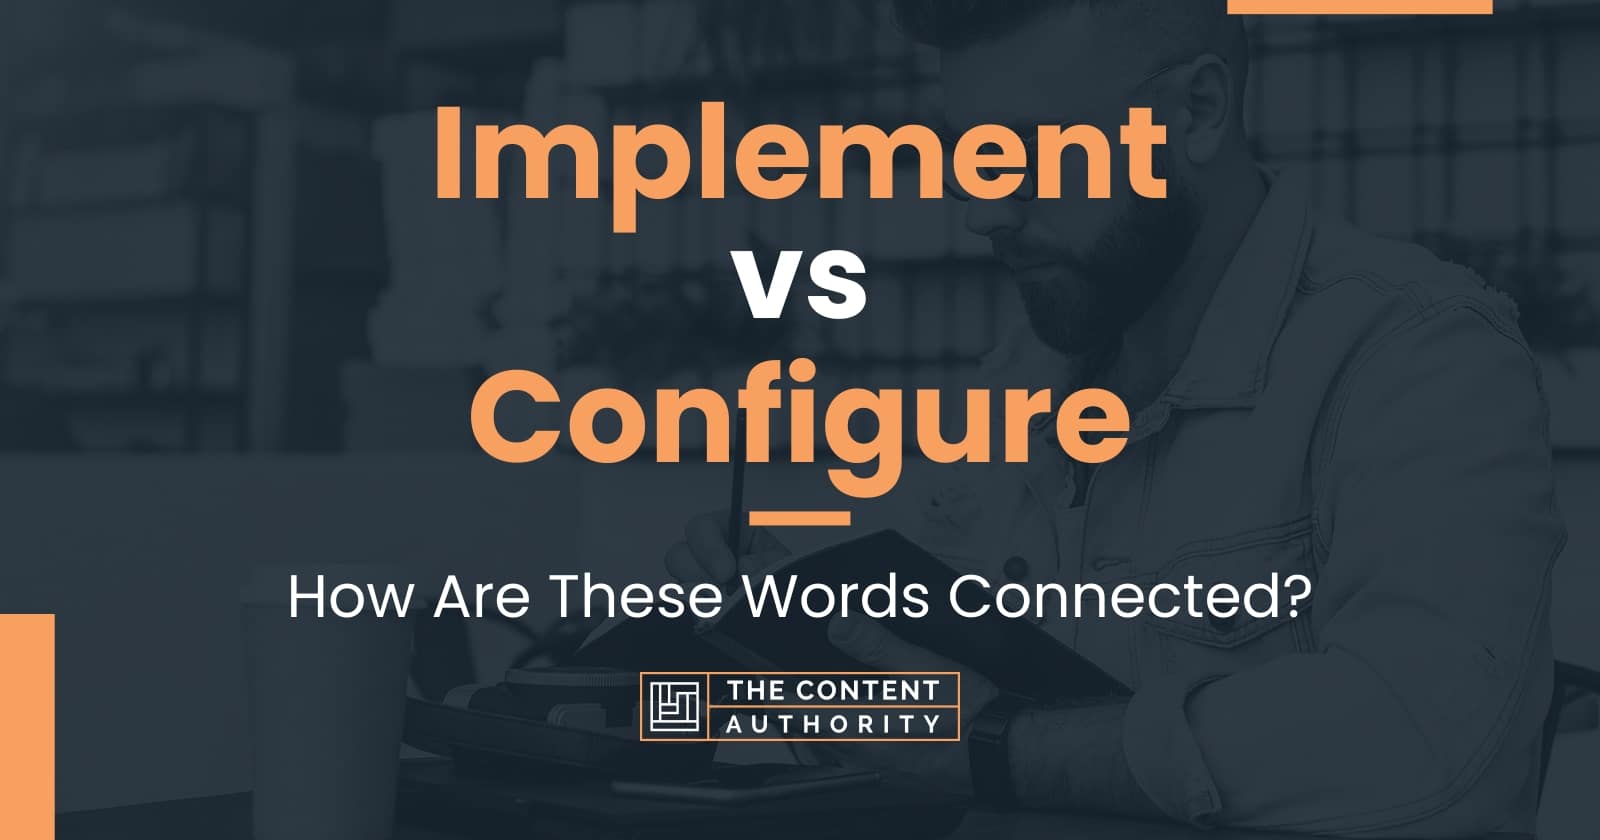 Implement vs Configure: Meaning And Differences